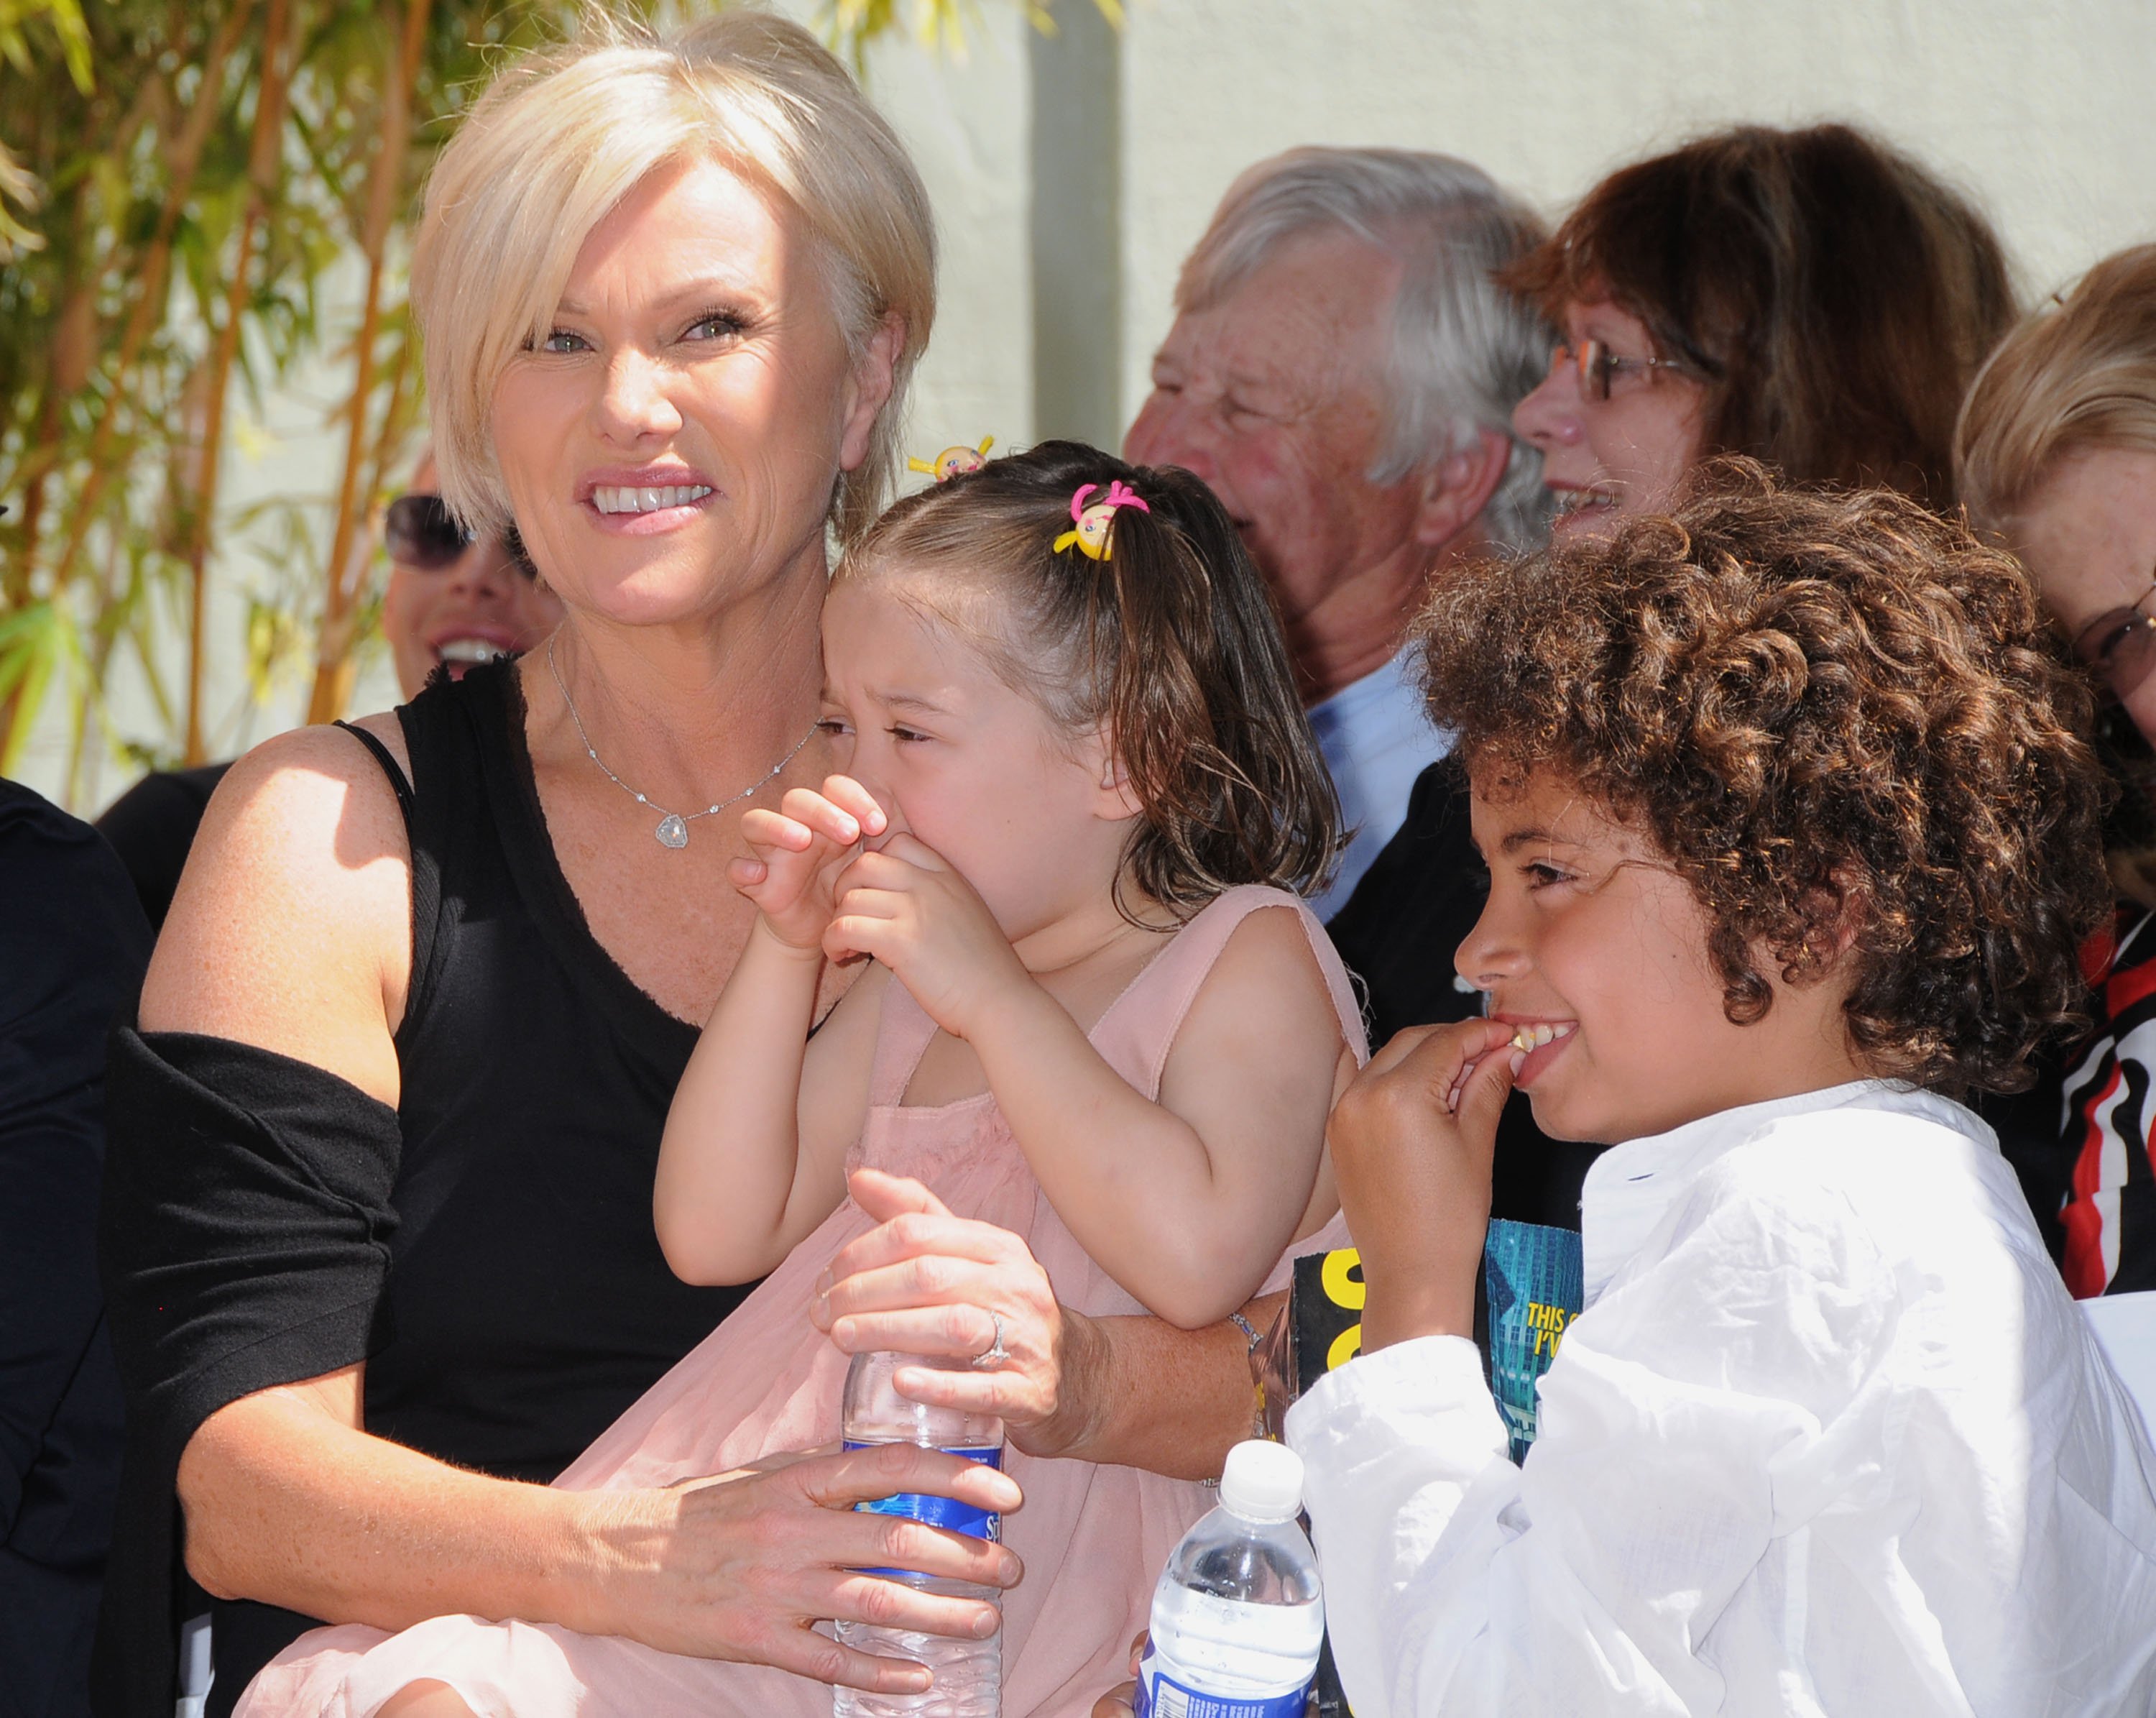 Deborra Lee Furness and children Ava and Oscar attend the handprint and footprint ceremony honoring Hugh Jackman at Grauman's Chinese Theatre on April 21, 2009 in Hollywood, California. | Source: Getty Images